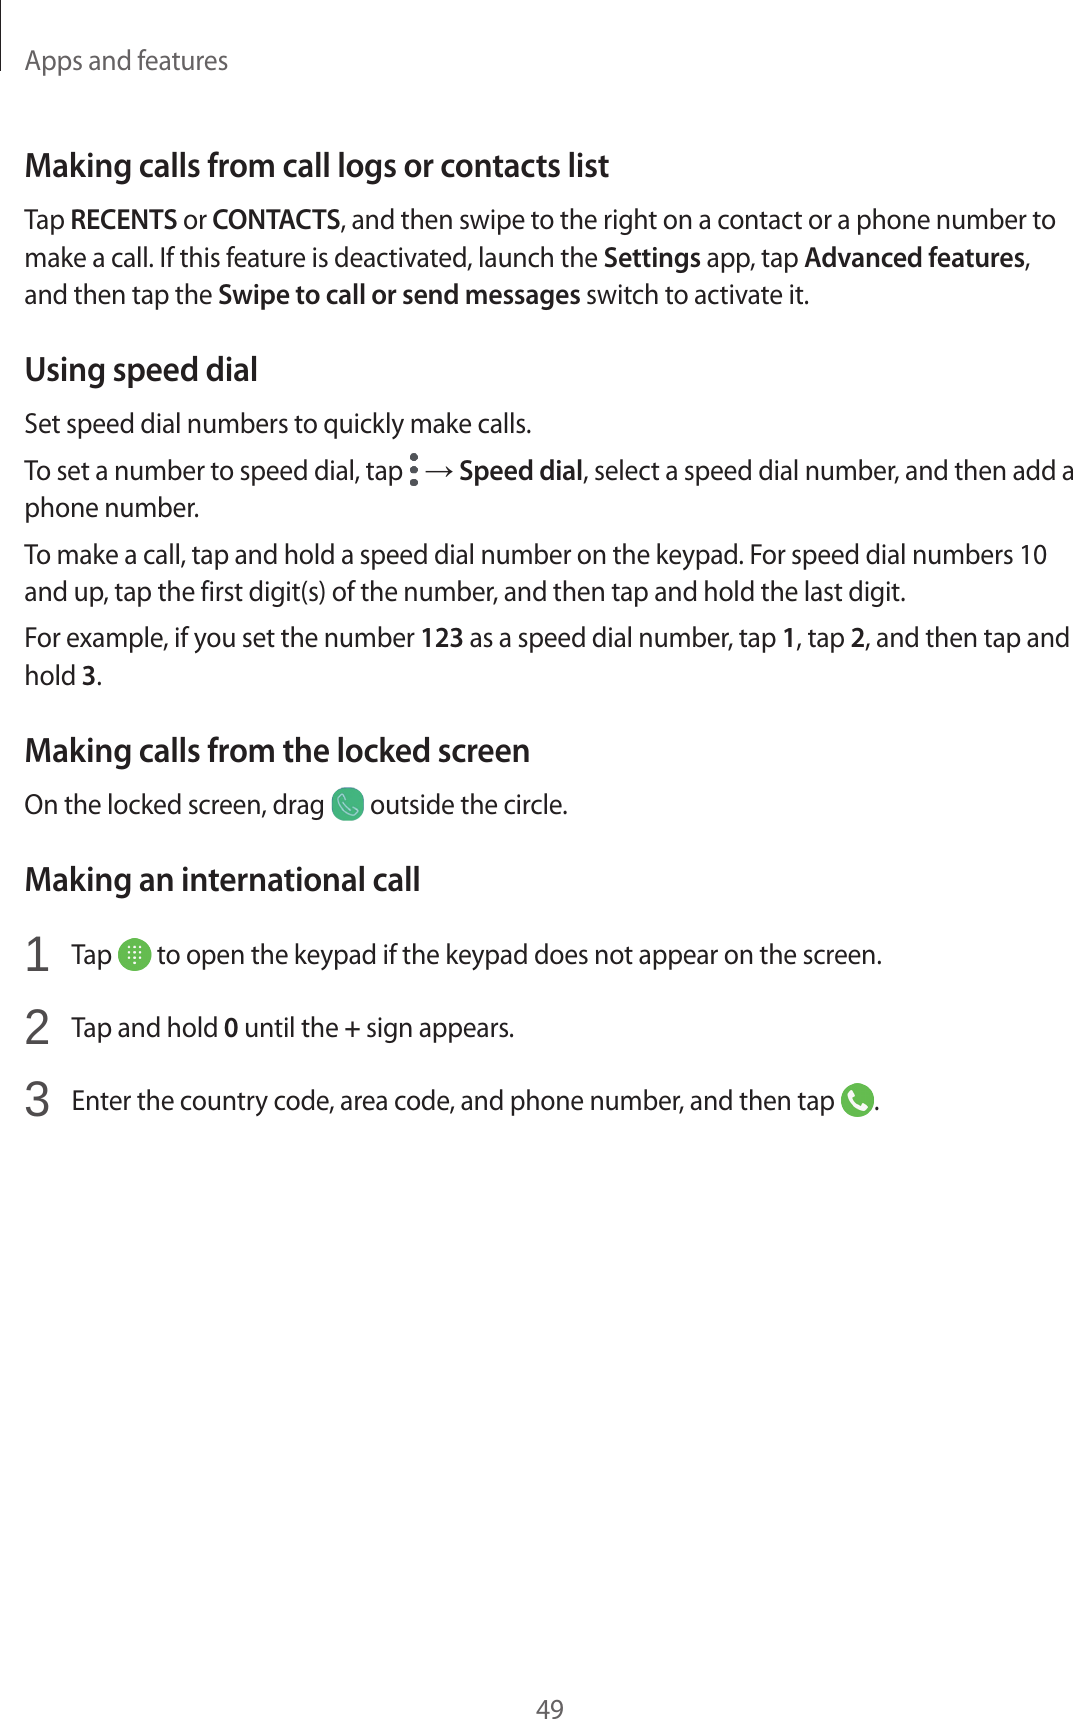 Apps and features49Making calls from call logs or contacts listTap RECENTS or CONTACTS, and then swipe to the right on a contact or a phone number to make a call. If this feature is deactivated, launch the Settings app, tap Advanced features, and then tap the Swipe to call or send messages switch to activate it.Using speed dialSet speed dial numbers to quickly make calls.To set a number to speed dial, tap   → Speed dial, select a speed dial number, and then add a phone number.To make a call, tap and hold a speed dial number on the keypad. For speed dial numbers 10 and up, tap the first digit(s) of the number, and then tap and hold the last digit.For example, if you set the number 123 as a speed dial number, tap 1, tap 2, and then tap and hold 3.Making calls from the locked screenOn the locked screen, drag   outside the circle.Making an international call1  Tap   to open the keypad if the keypad does not appear on the screen.2  Tap and hold 0 until the + sign appears.3  Enter the country code, area code, and phone number, and then tap  .